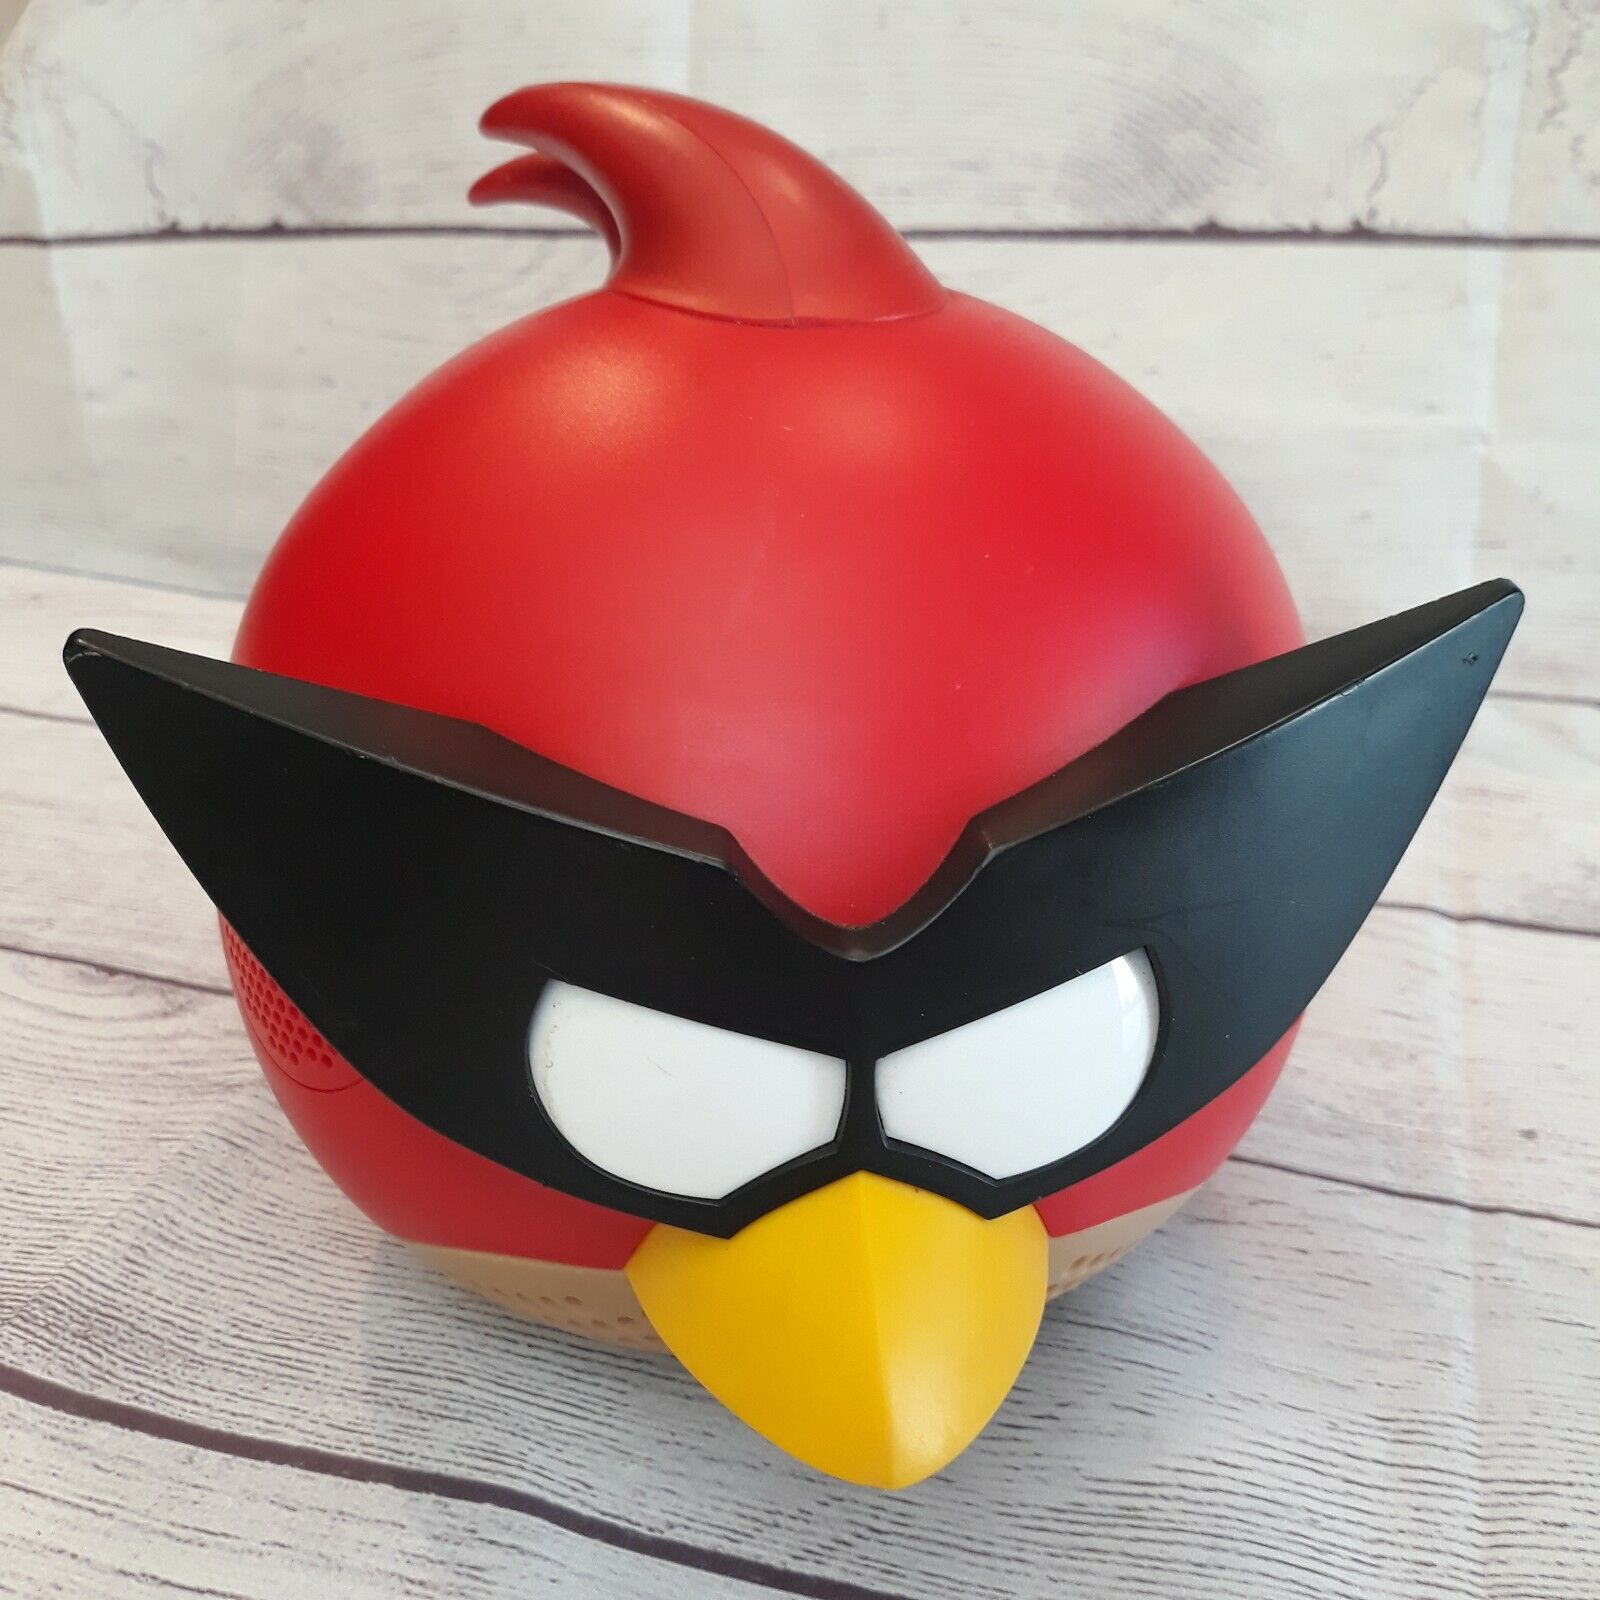 Space Angry Birds 2.1 Stereo Speaker 30 Watts iPhone iPod iPad MP3 GEAR4